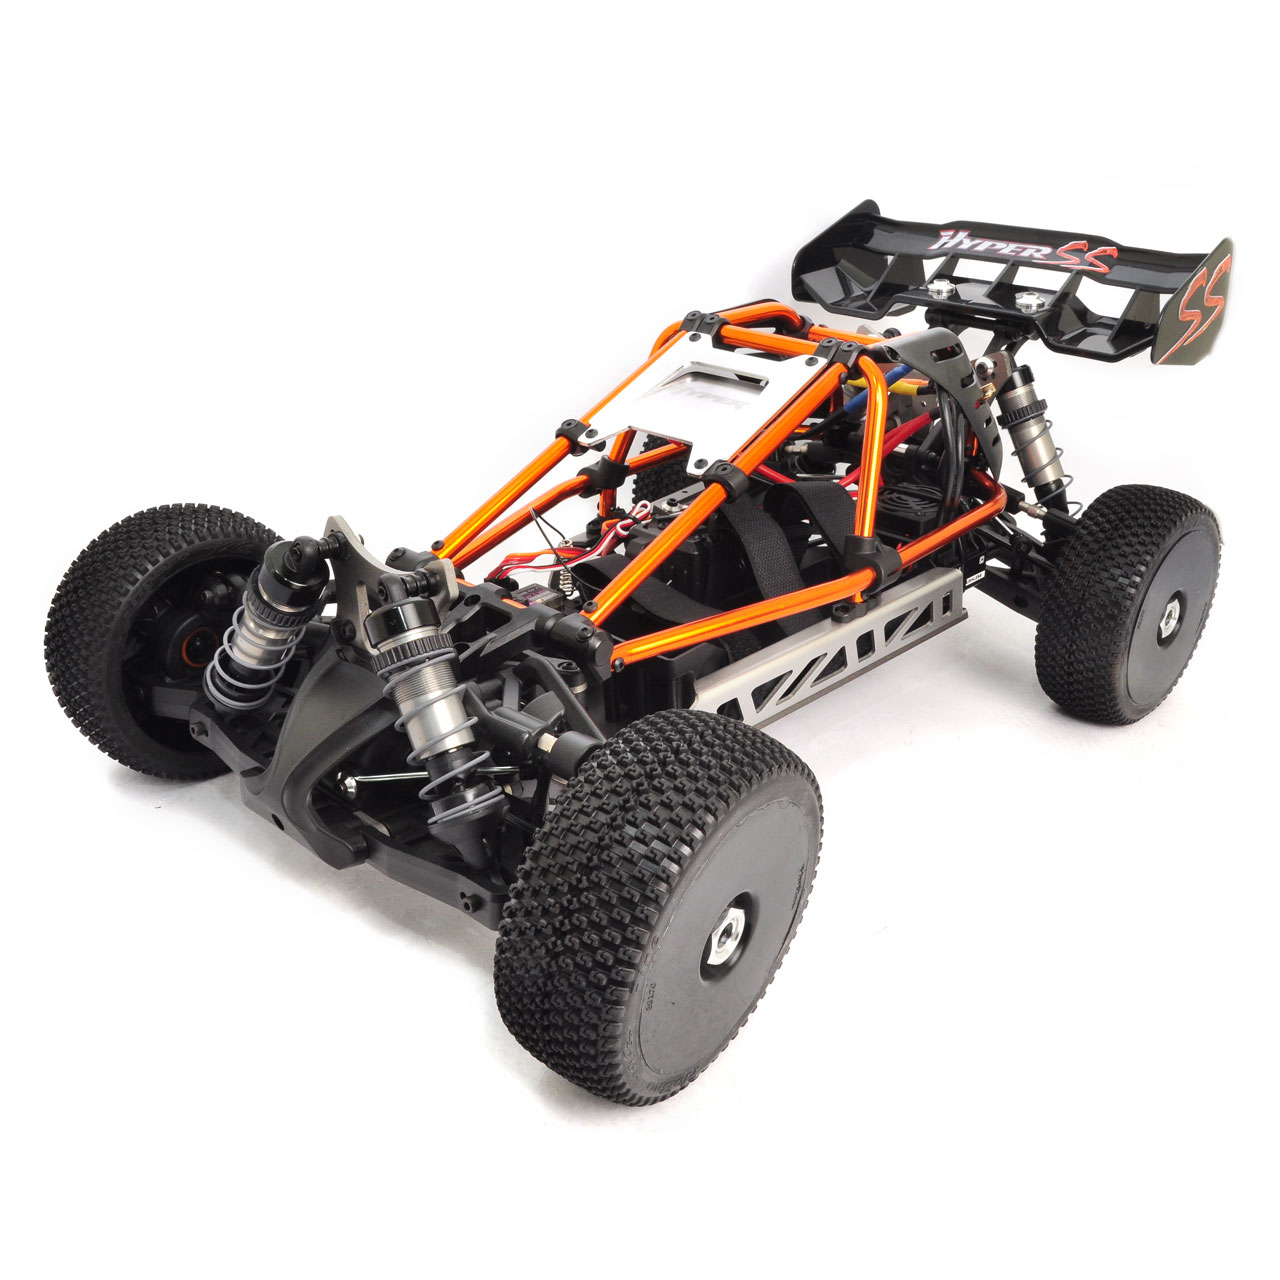 Hobao Hyper Cage Buggy Electro 1/8 150A 6s RTR